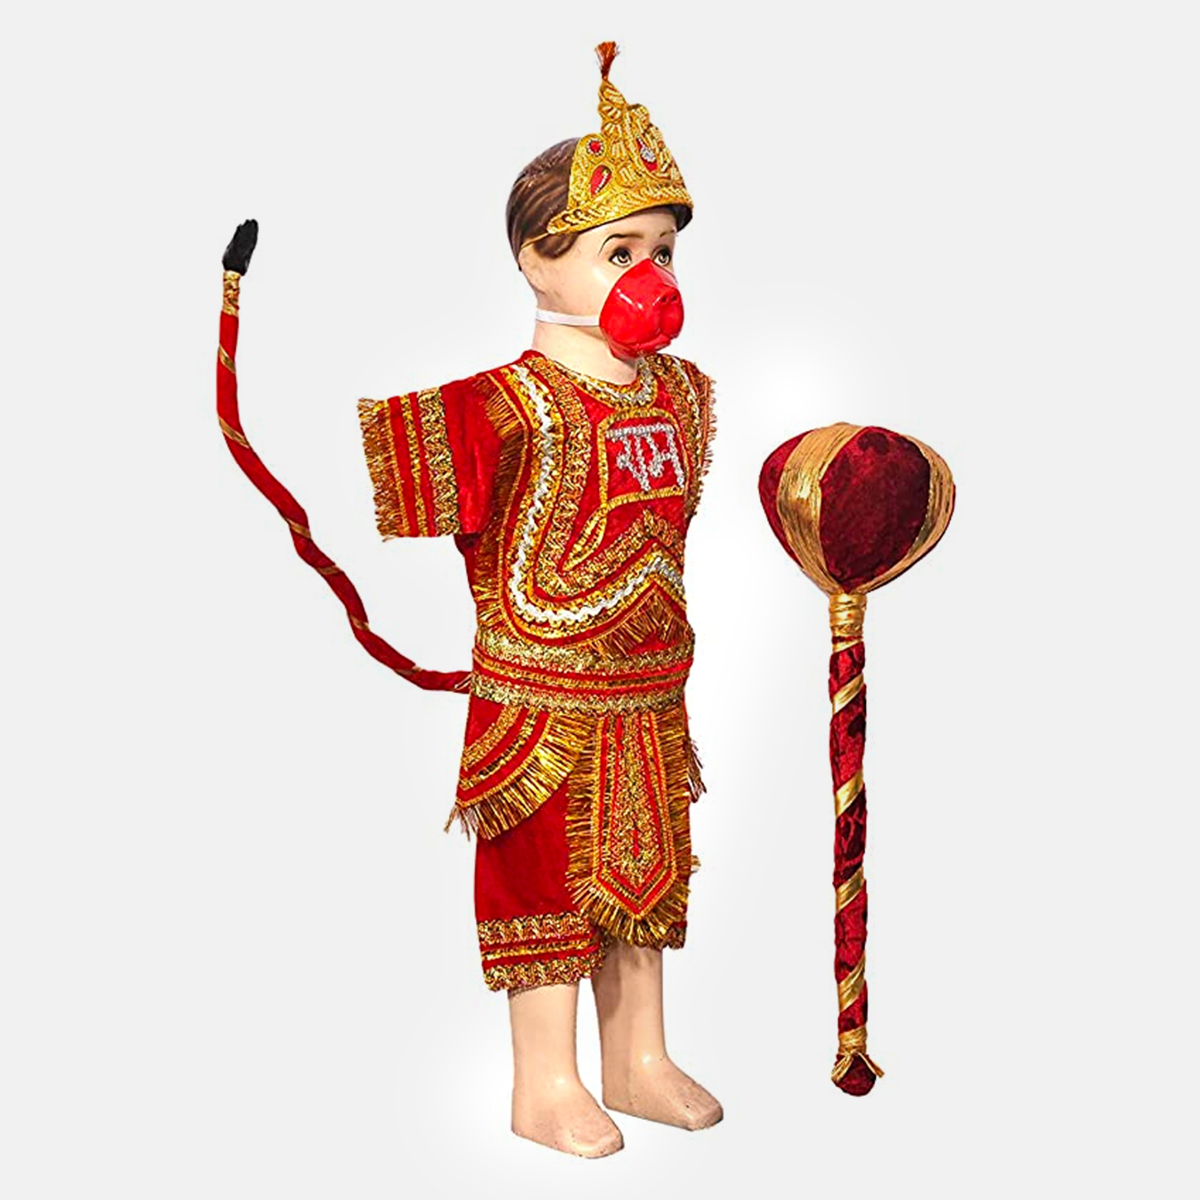 Buy Hanuman Ji Chola Red with Jai Shri Ram on Dress, Hanuman Ji Dress, Hanuman  Ji Vastra, Bajrangbali Chola | Quality Exclusive Pack of 1 Piece | Small  Size Online at Low